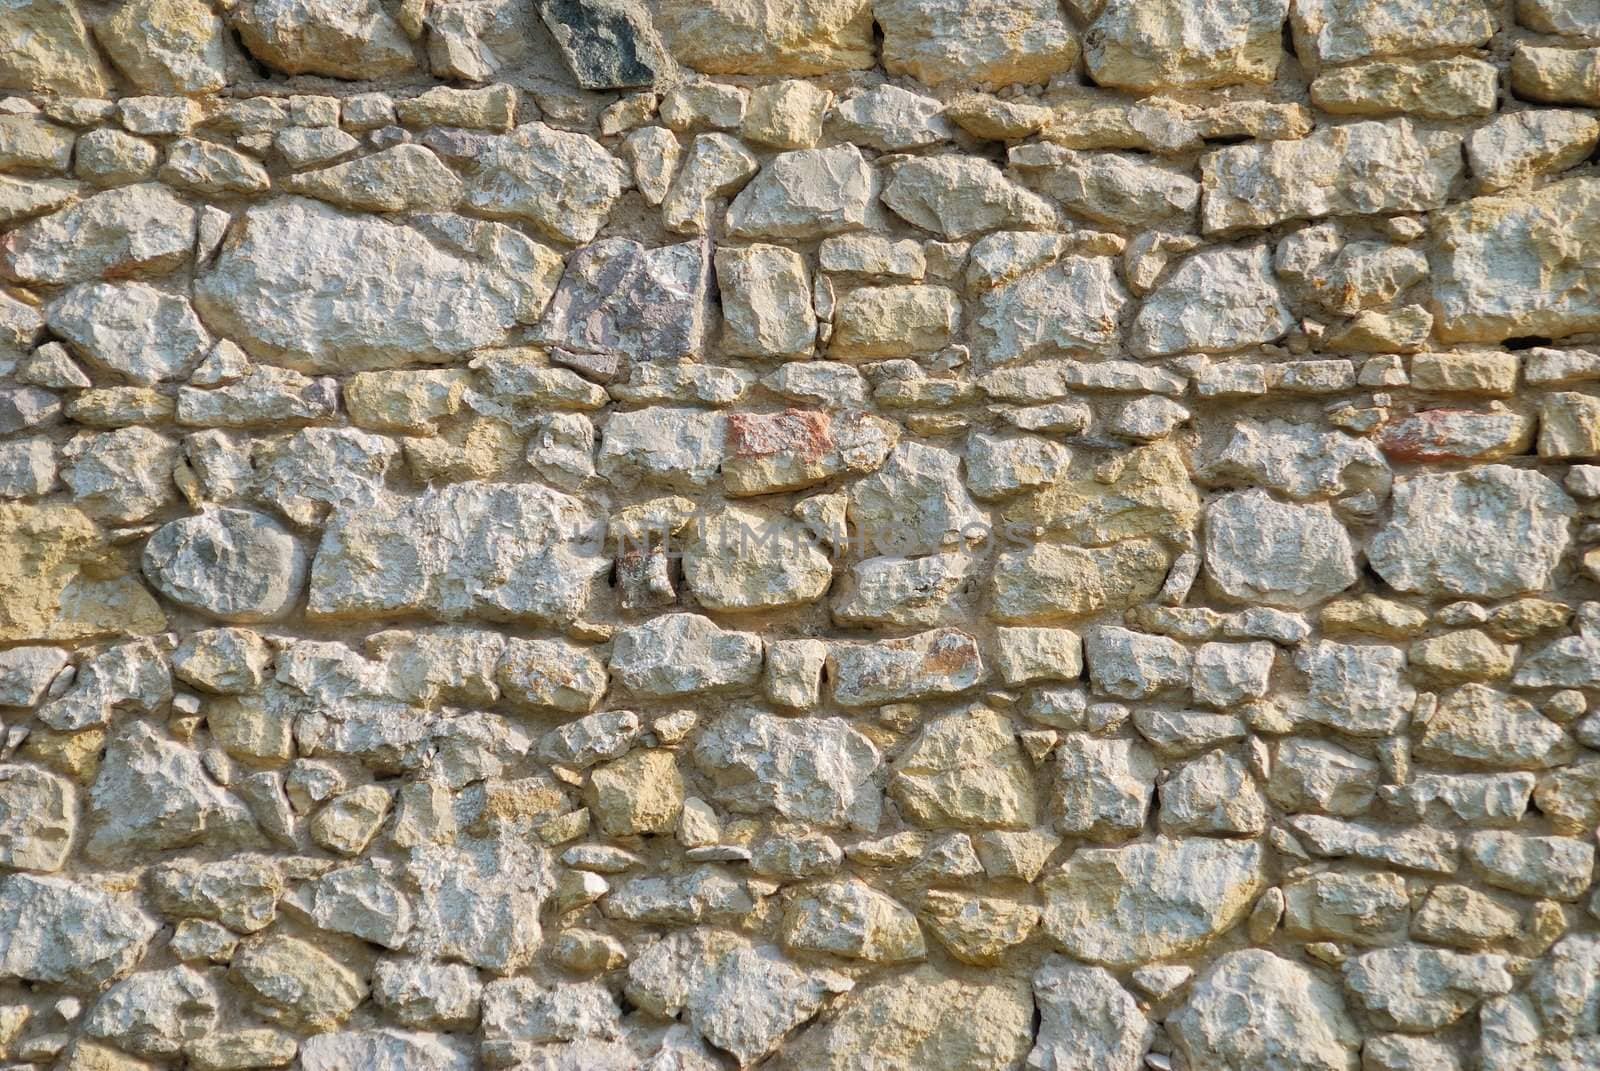 antique wall background of stone pieces